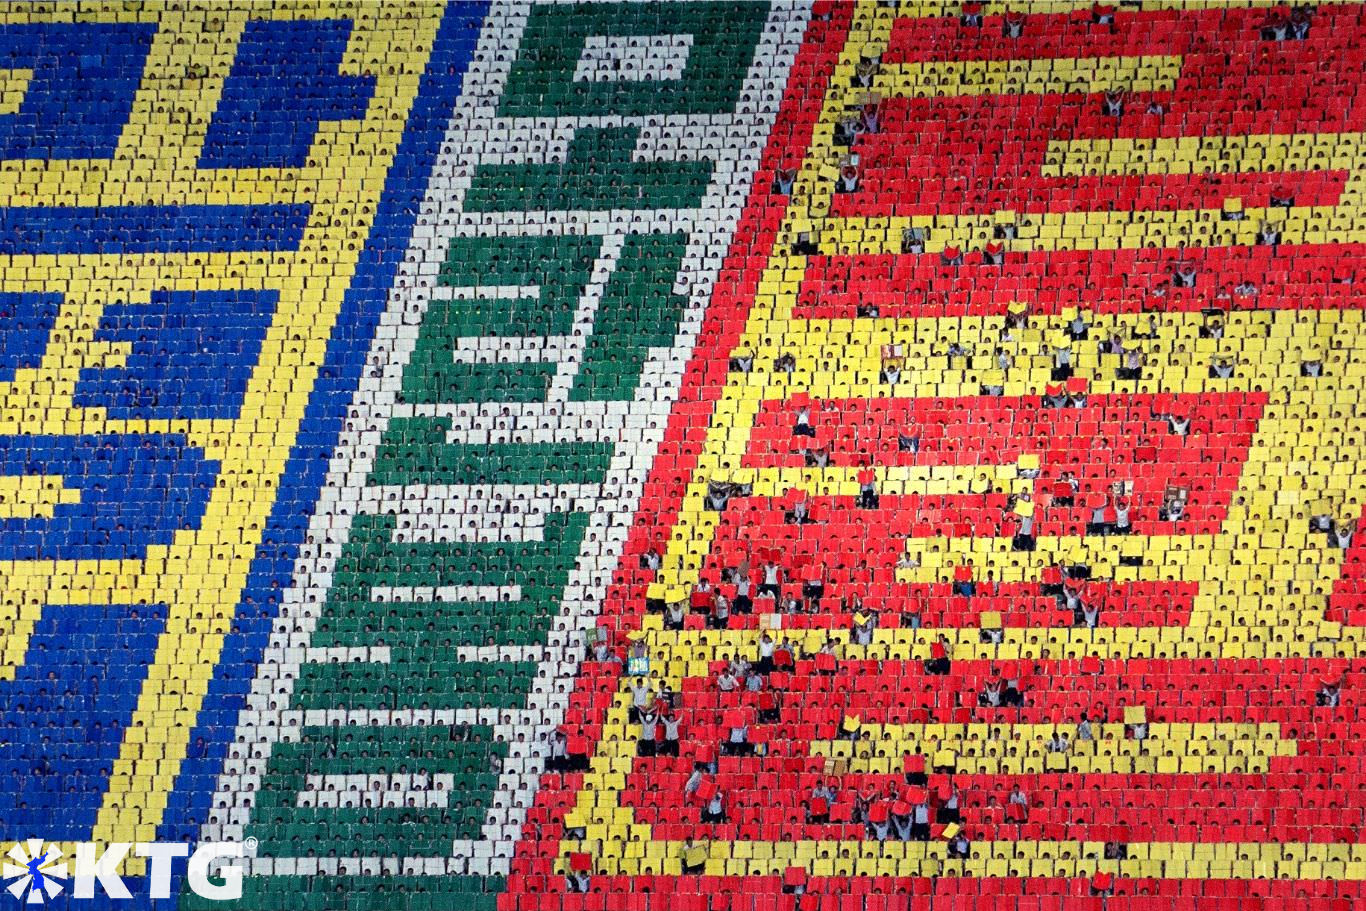 The Mass Games in North Korea have a backdrop of 17,000 students. Each student makes a tiny pixel creating gigantic mosaics. Trip arranged by KTG Travel